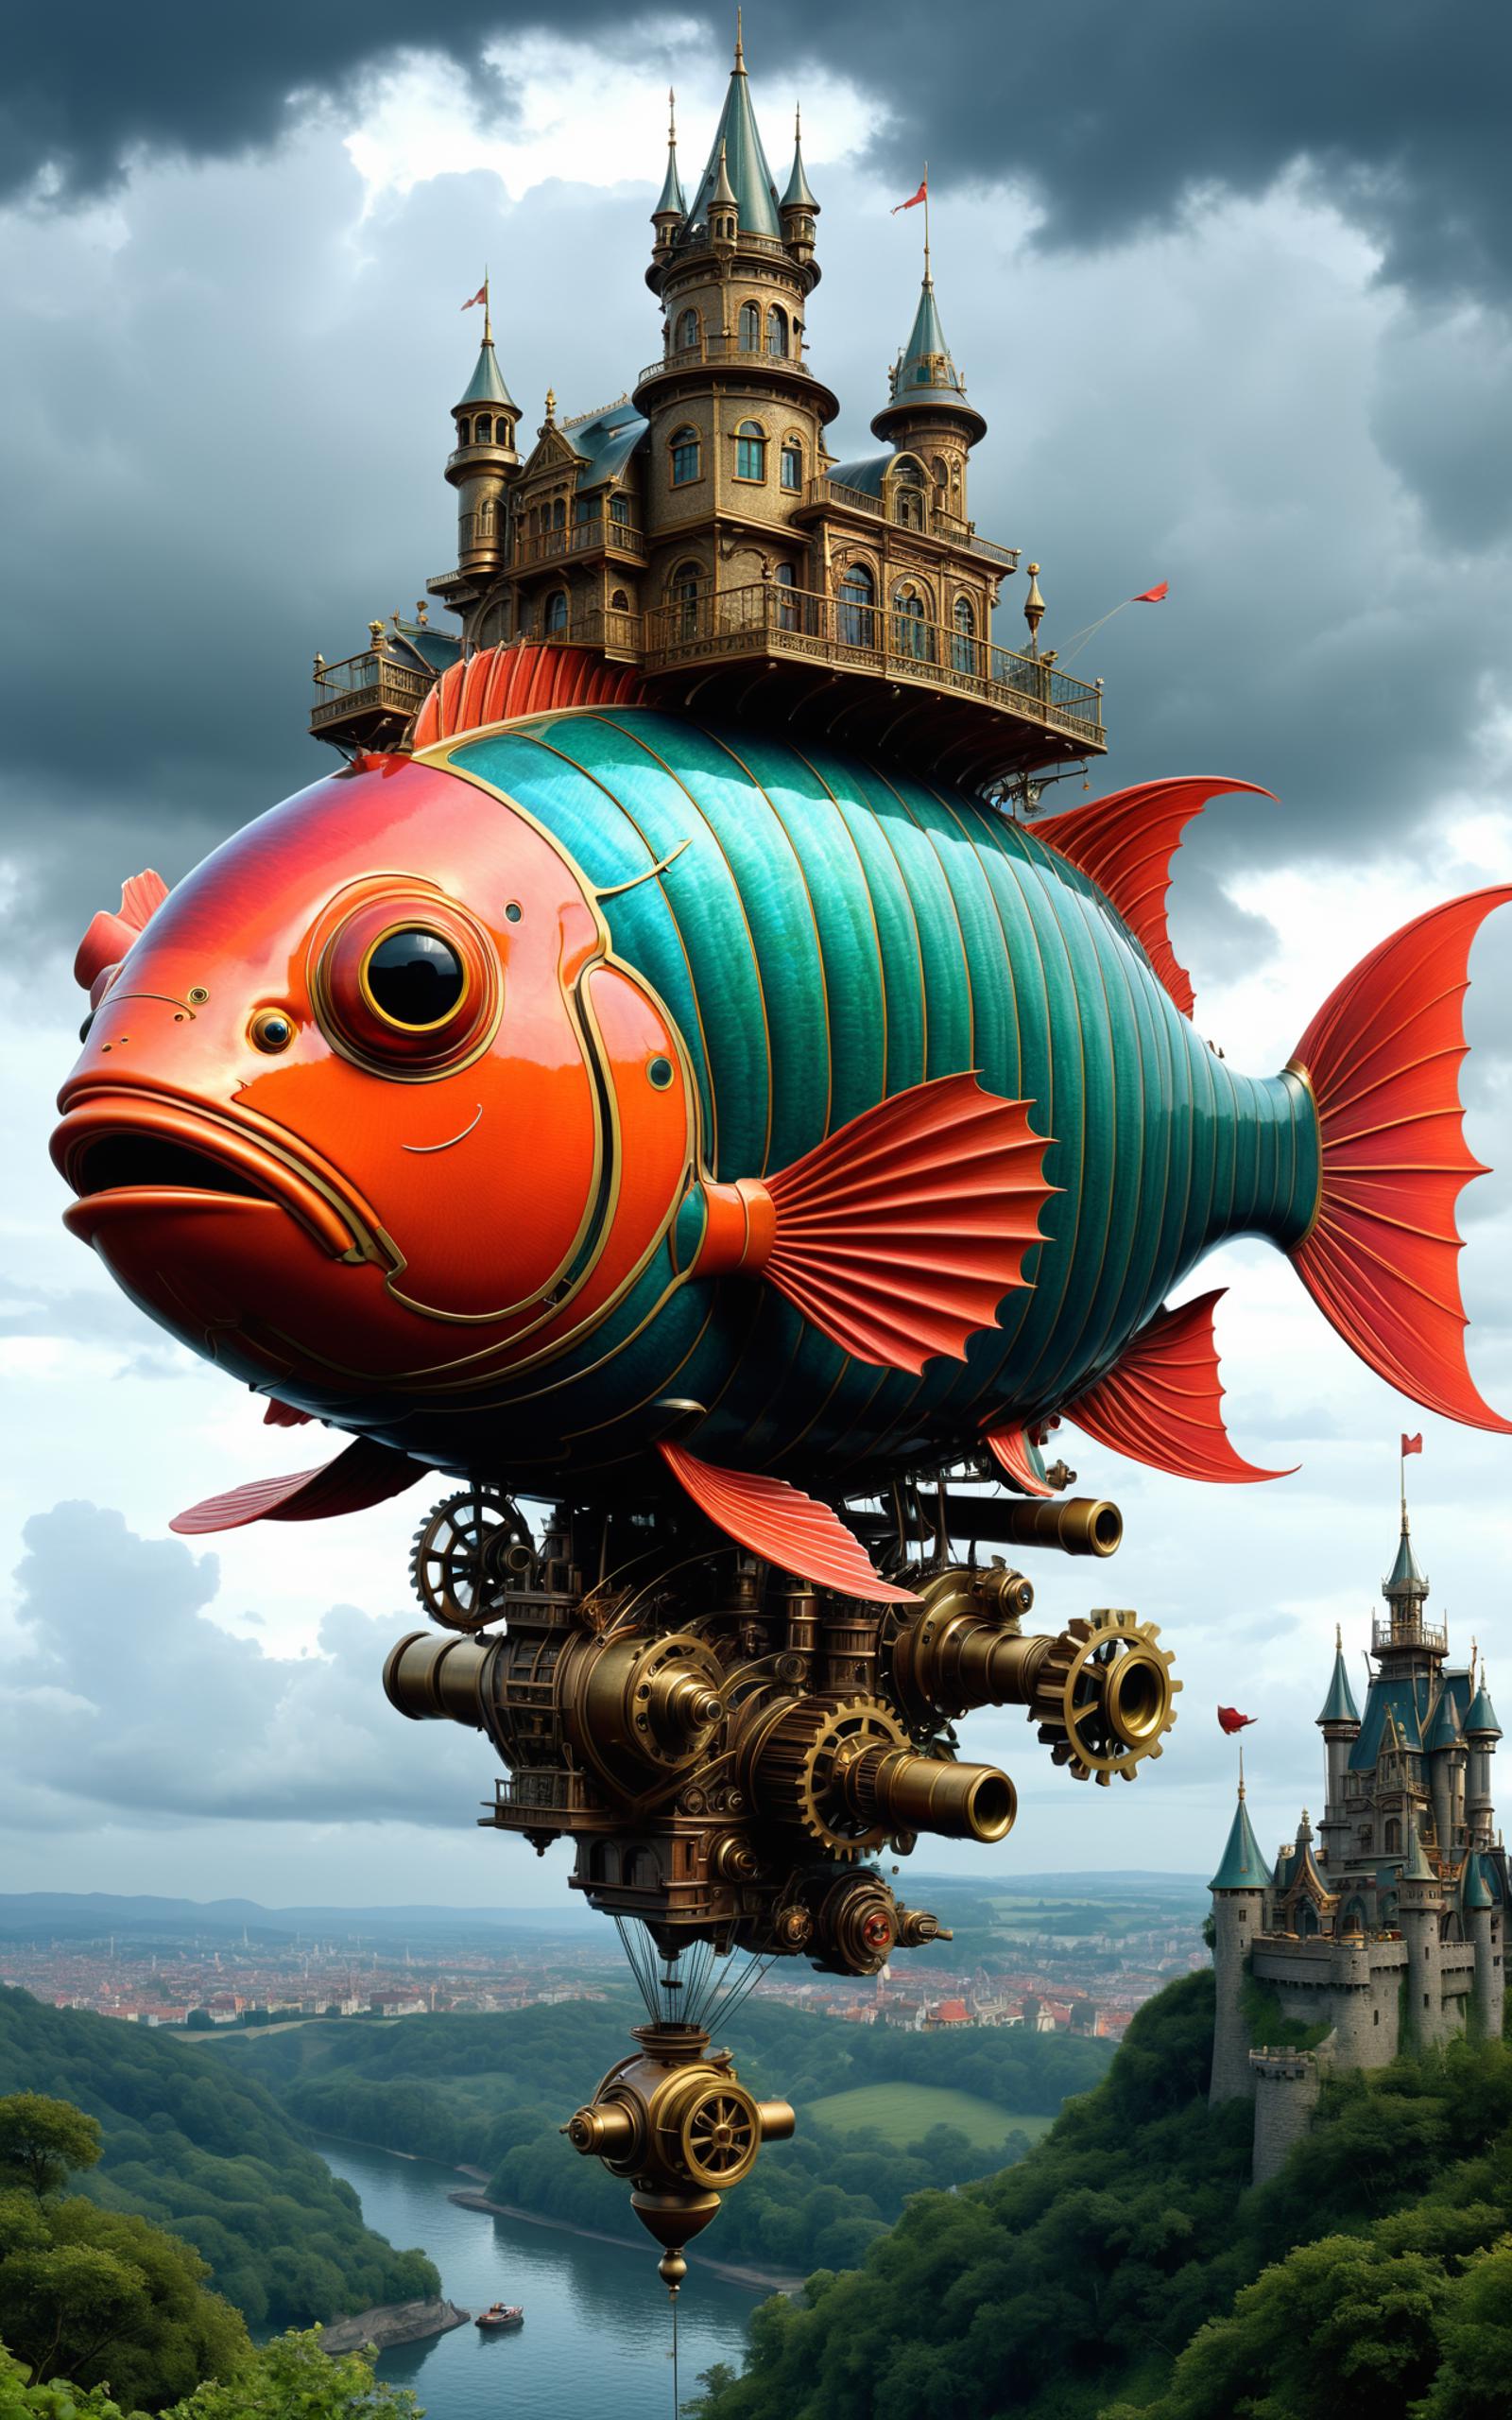 A Fish Balloon Floating in the Air with a Castle in the Background